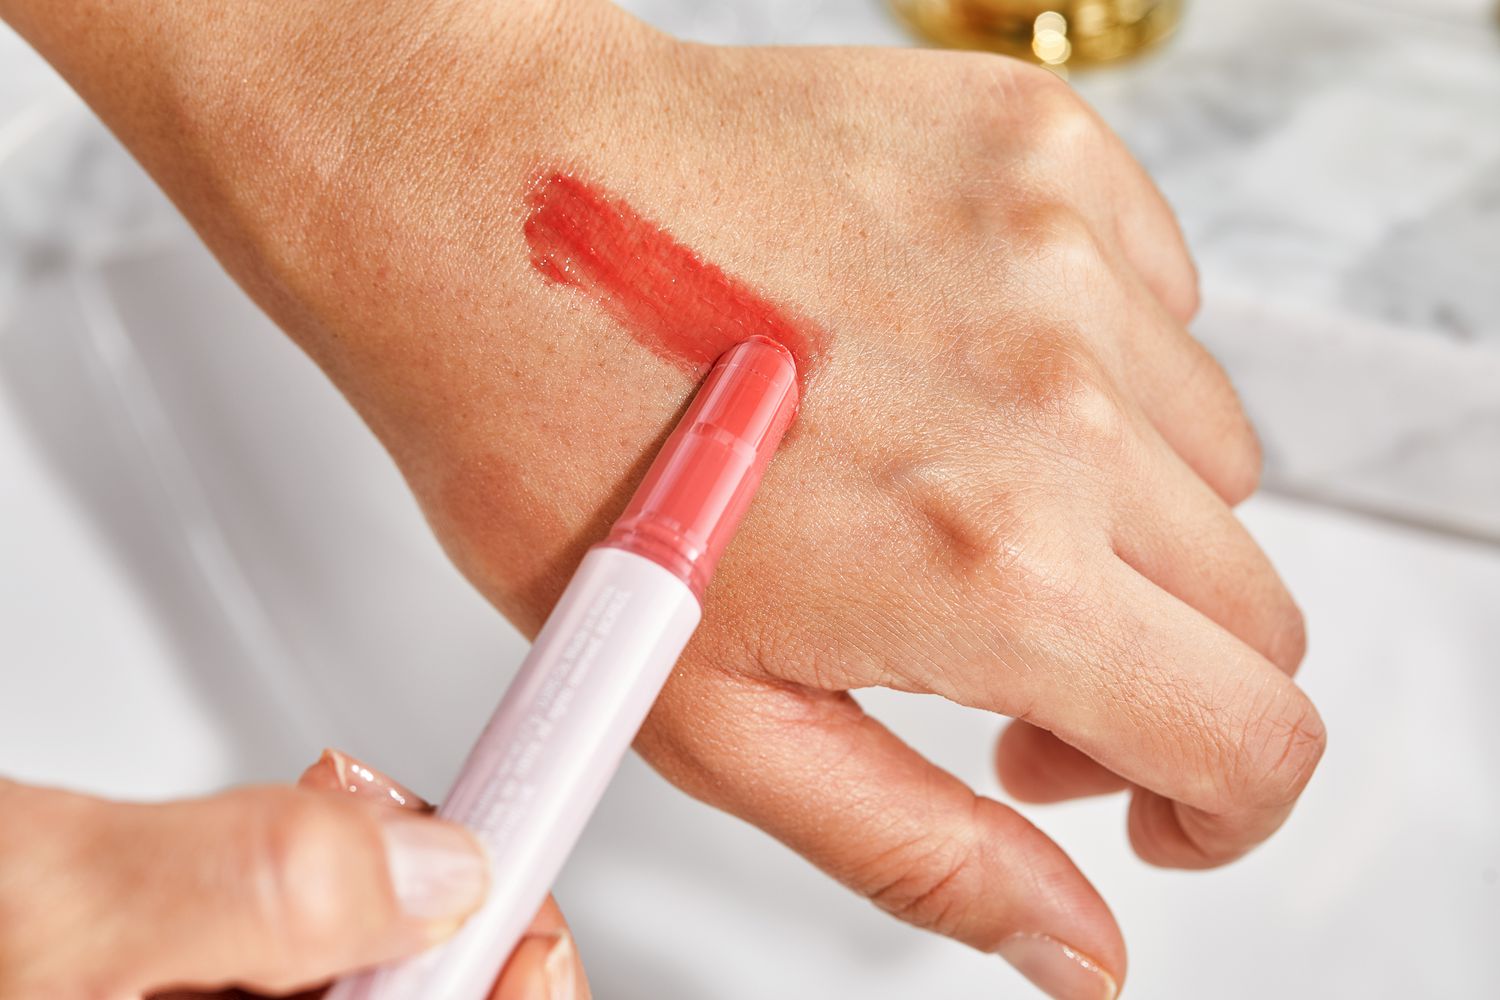 Close up of a person applying tarte Maracuja Juicy Lip Balm to the back of their hand